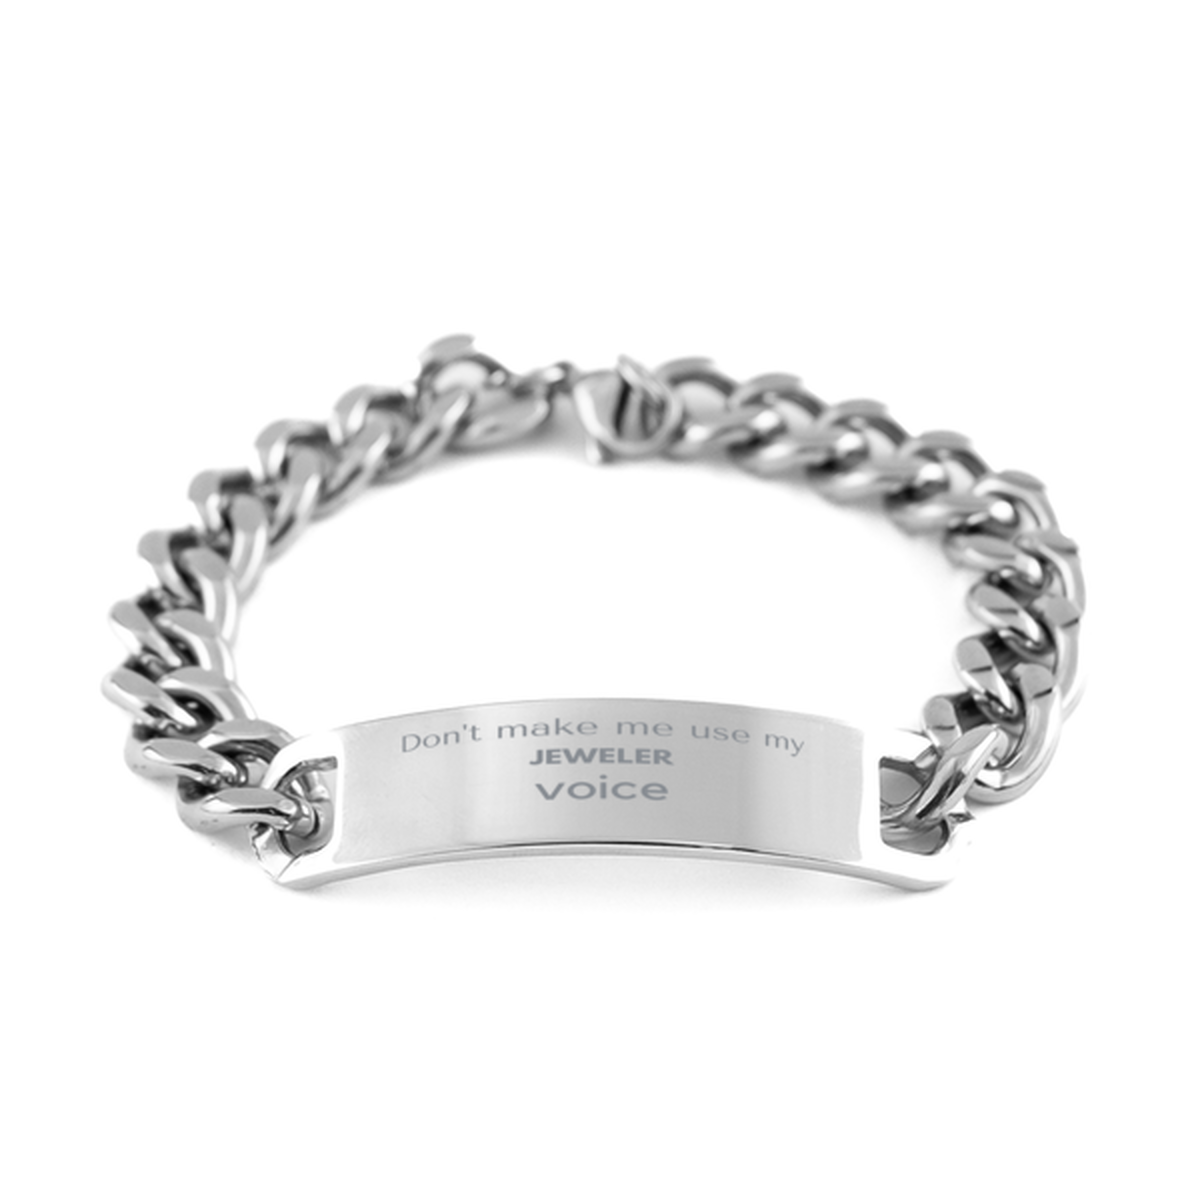 Don't make me use my Jeweler voice, Sarcasm Jeweler Gifts, Christmas Jeweler Cuban Chain Stainless Steel Bracelet Birthday Unique Gifts For Jeweler Coworkers, Men, Women, Colleague, Friends